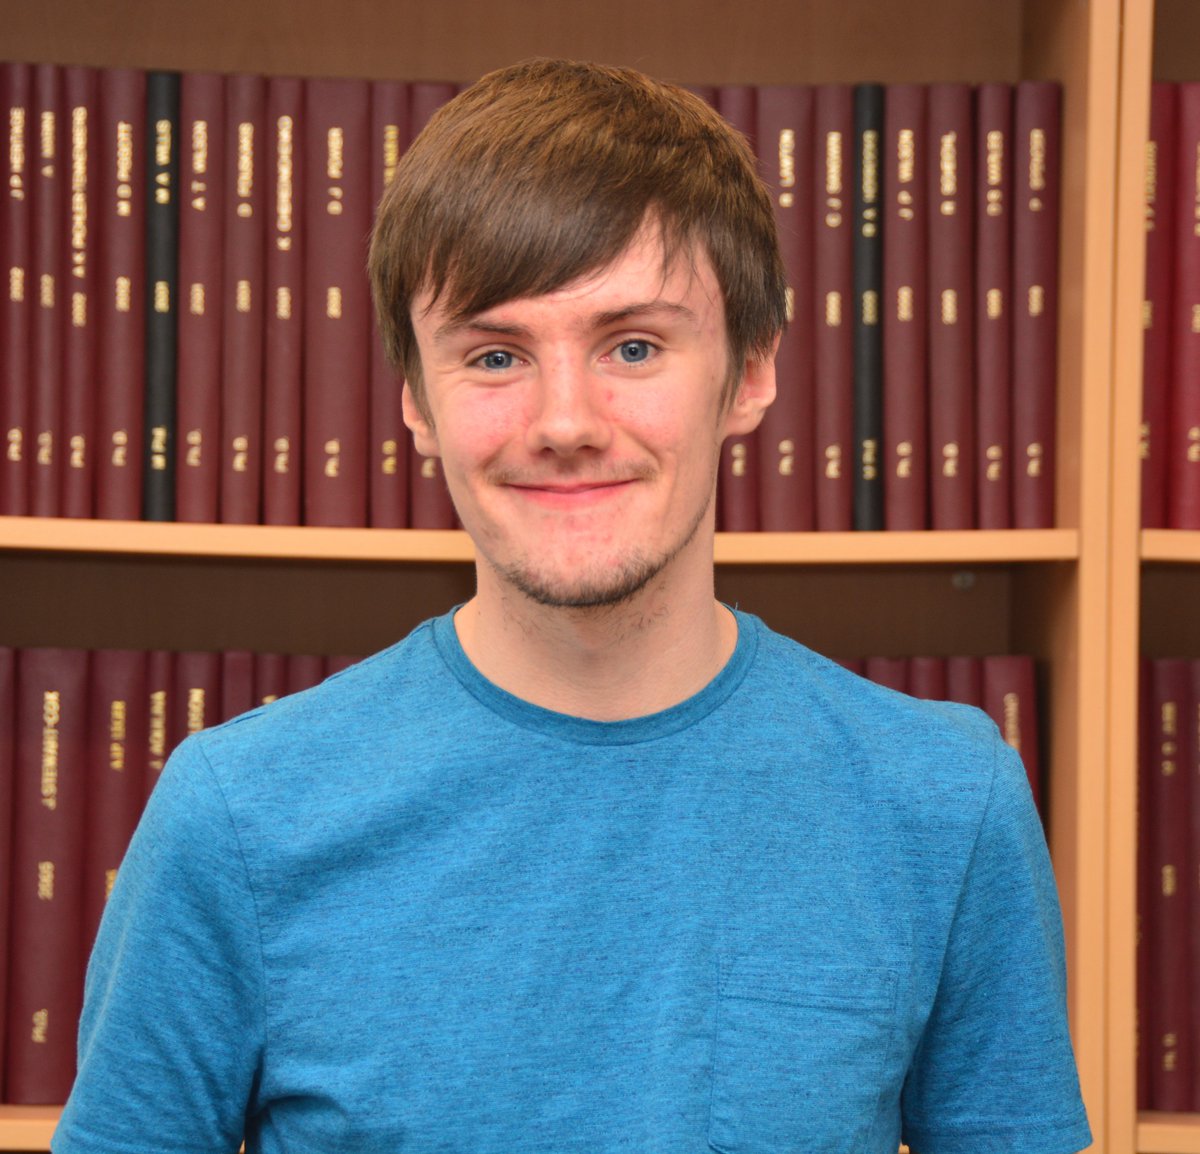 Congratulations to Jason Wood who passed his PhD viva yesterday! Jason's thesis described the effects of interventions on parasite evolution. During his time in SAMBa, Jason also spent a year seconded to @UKHSA, working on understanding the spread of disease. @MathsatBath